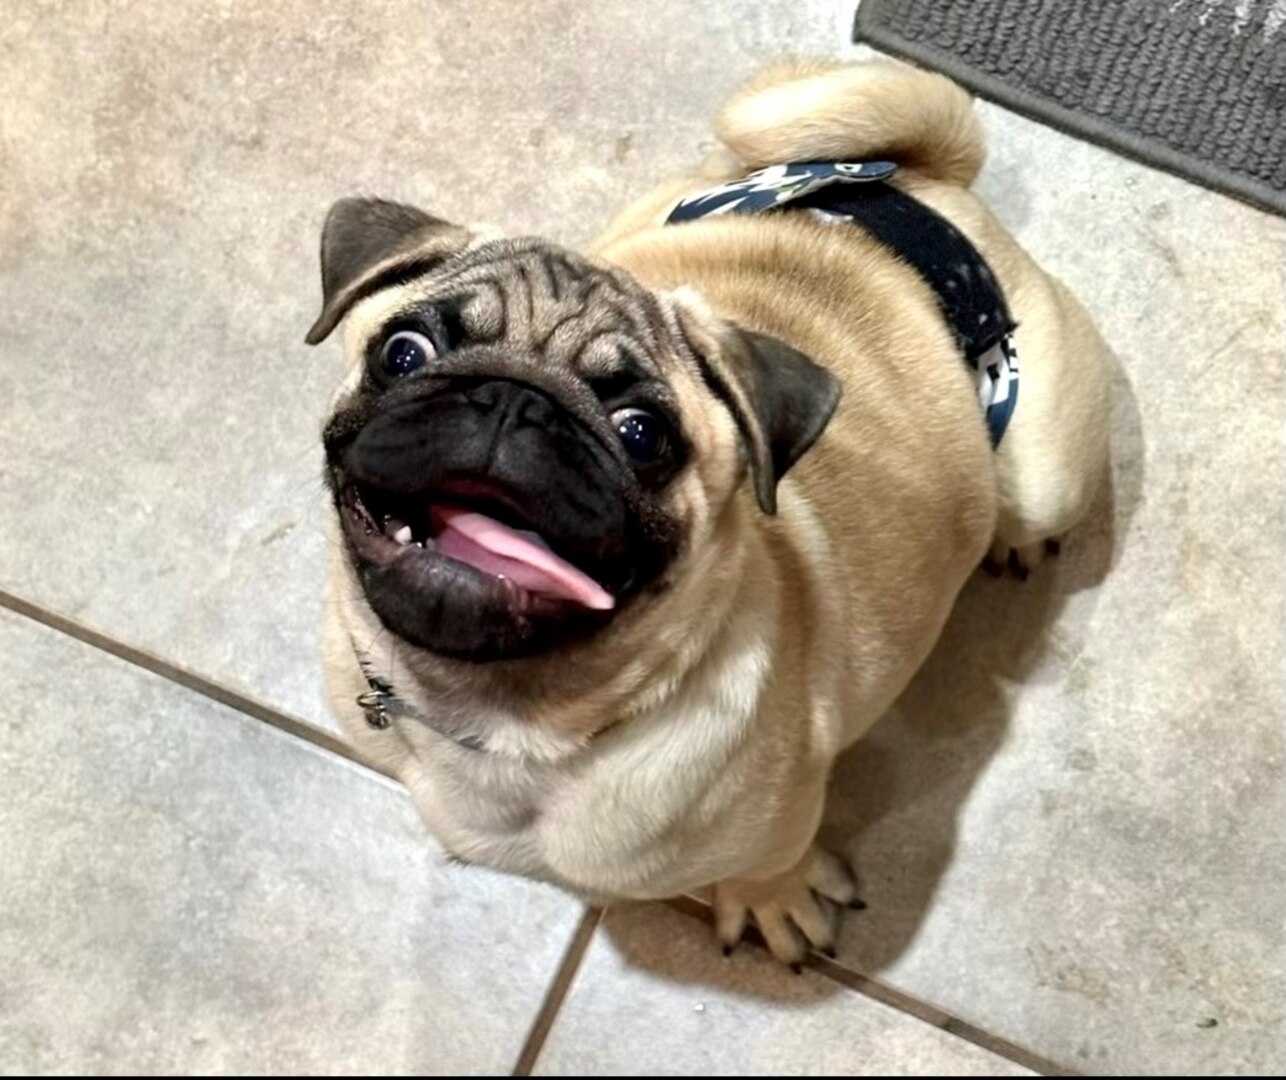 Pug looking up from the floor, tongue out